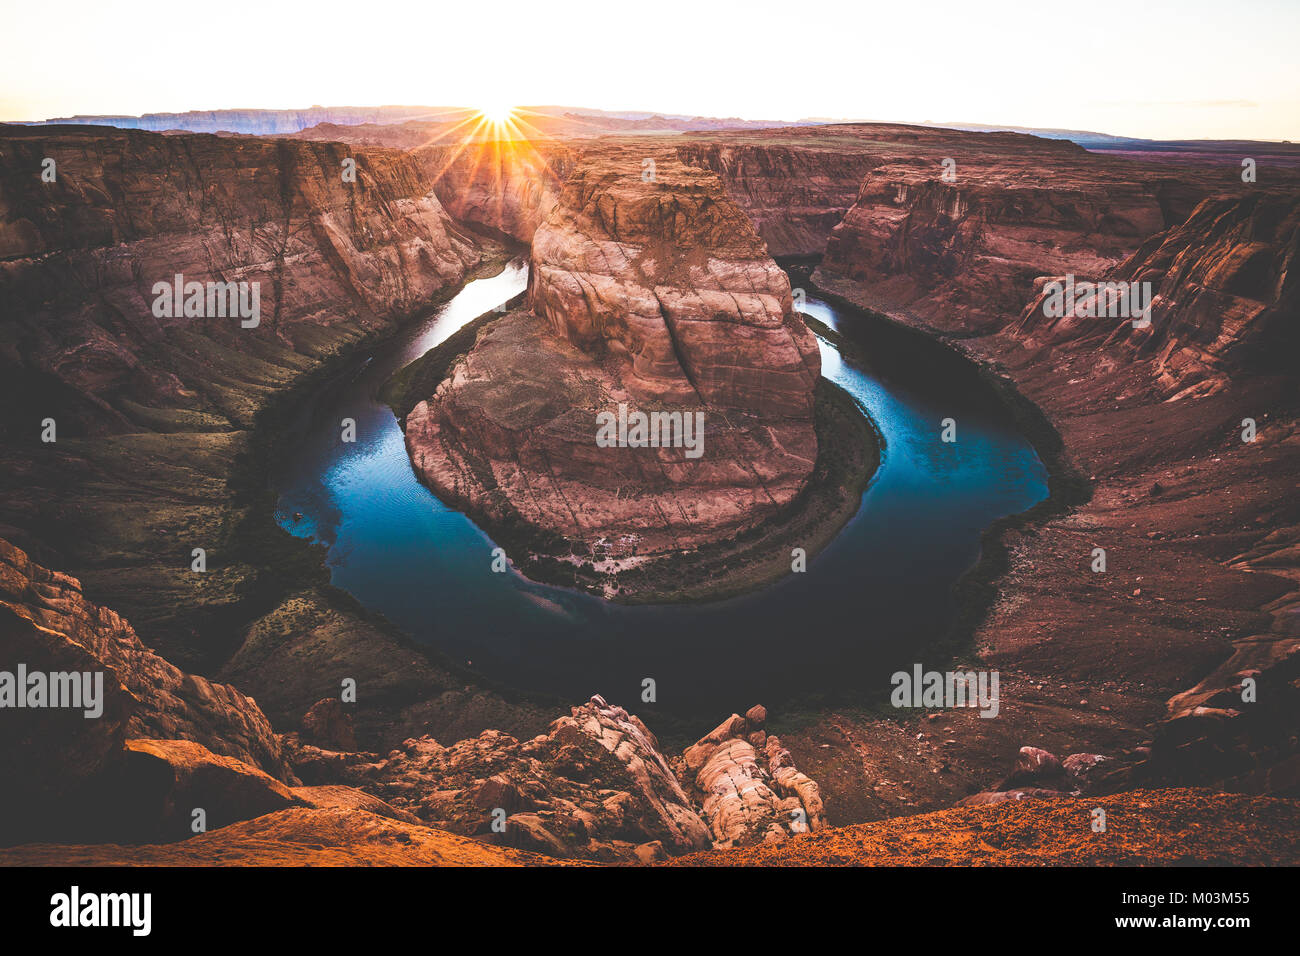 Classic wide-angle view of famous Horseshoe Bend, a horseshoe-shaped meander of the Colorado River located near the town of Page, Arizona, USA Stock Photo